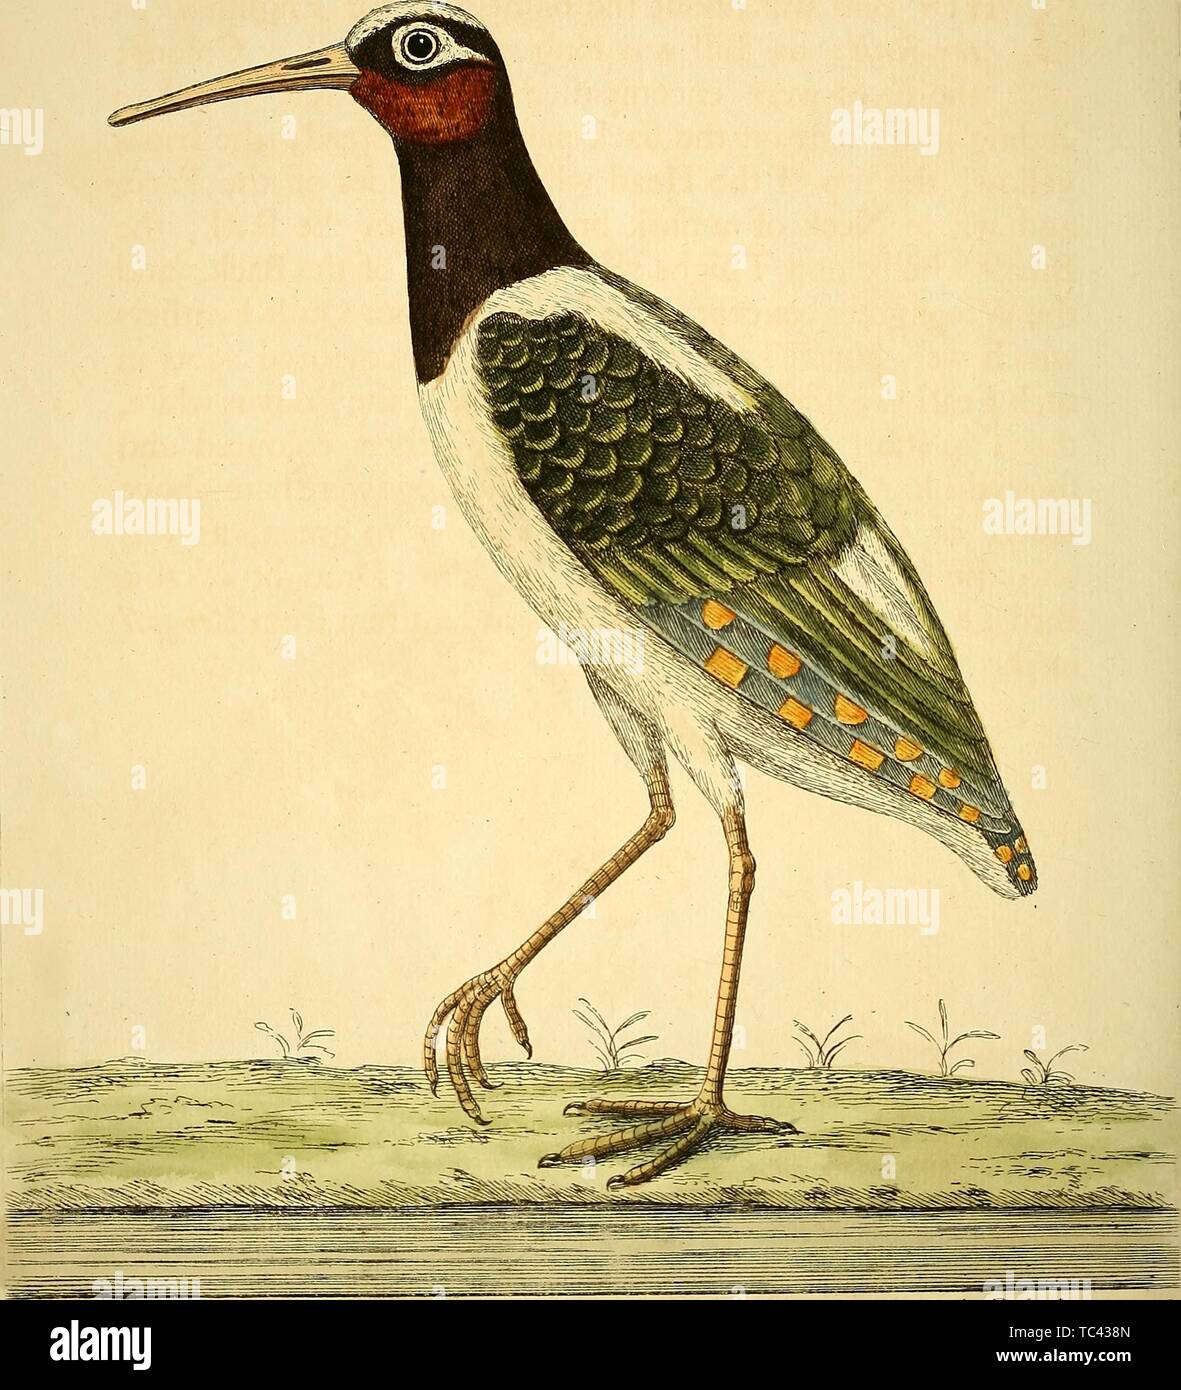 Engraving of the Bengal Water Rail (Ralus Aquaticus Bengalensis), from the book 'A natural history of birds' by Eleazar Albin, William Derham, Jonathan Dwight, and Marcia Brady, 1731. Courtesy Internet Archive. () Stock Photo